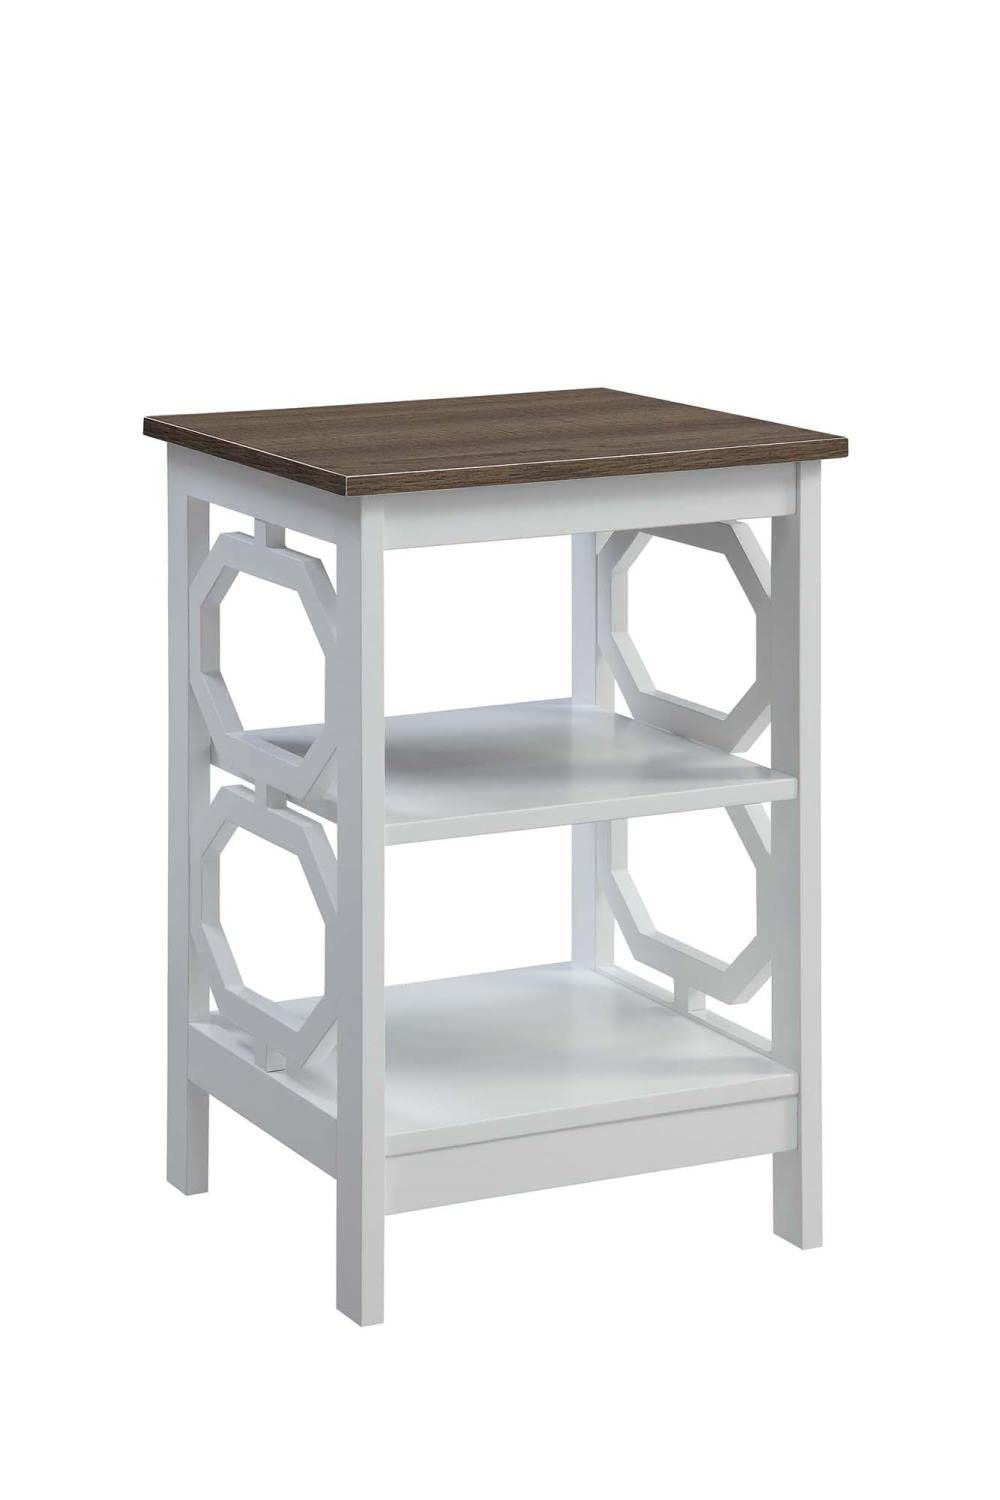 Convenience Concepts Omega End Table w/ Shelves & Driftwood Top (White, 15.75"x15.75"x23.75") $39 + Free Shipping